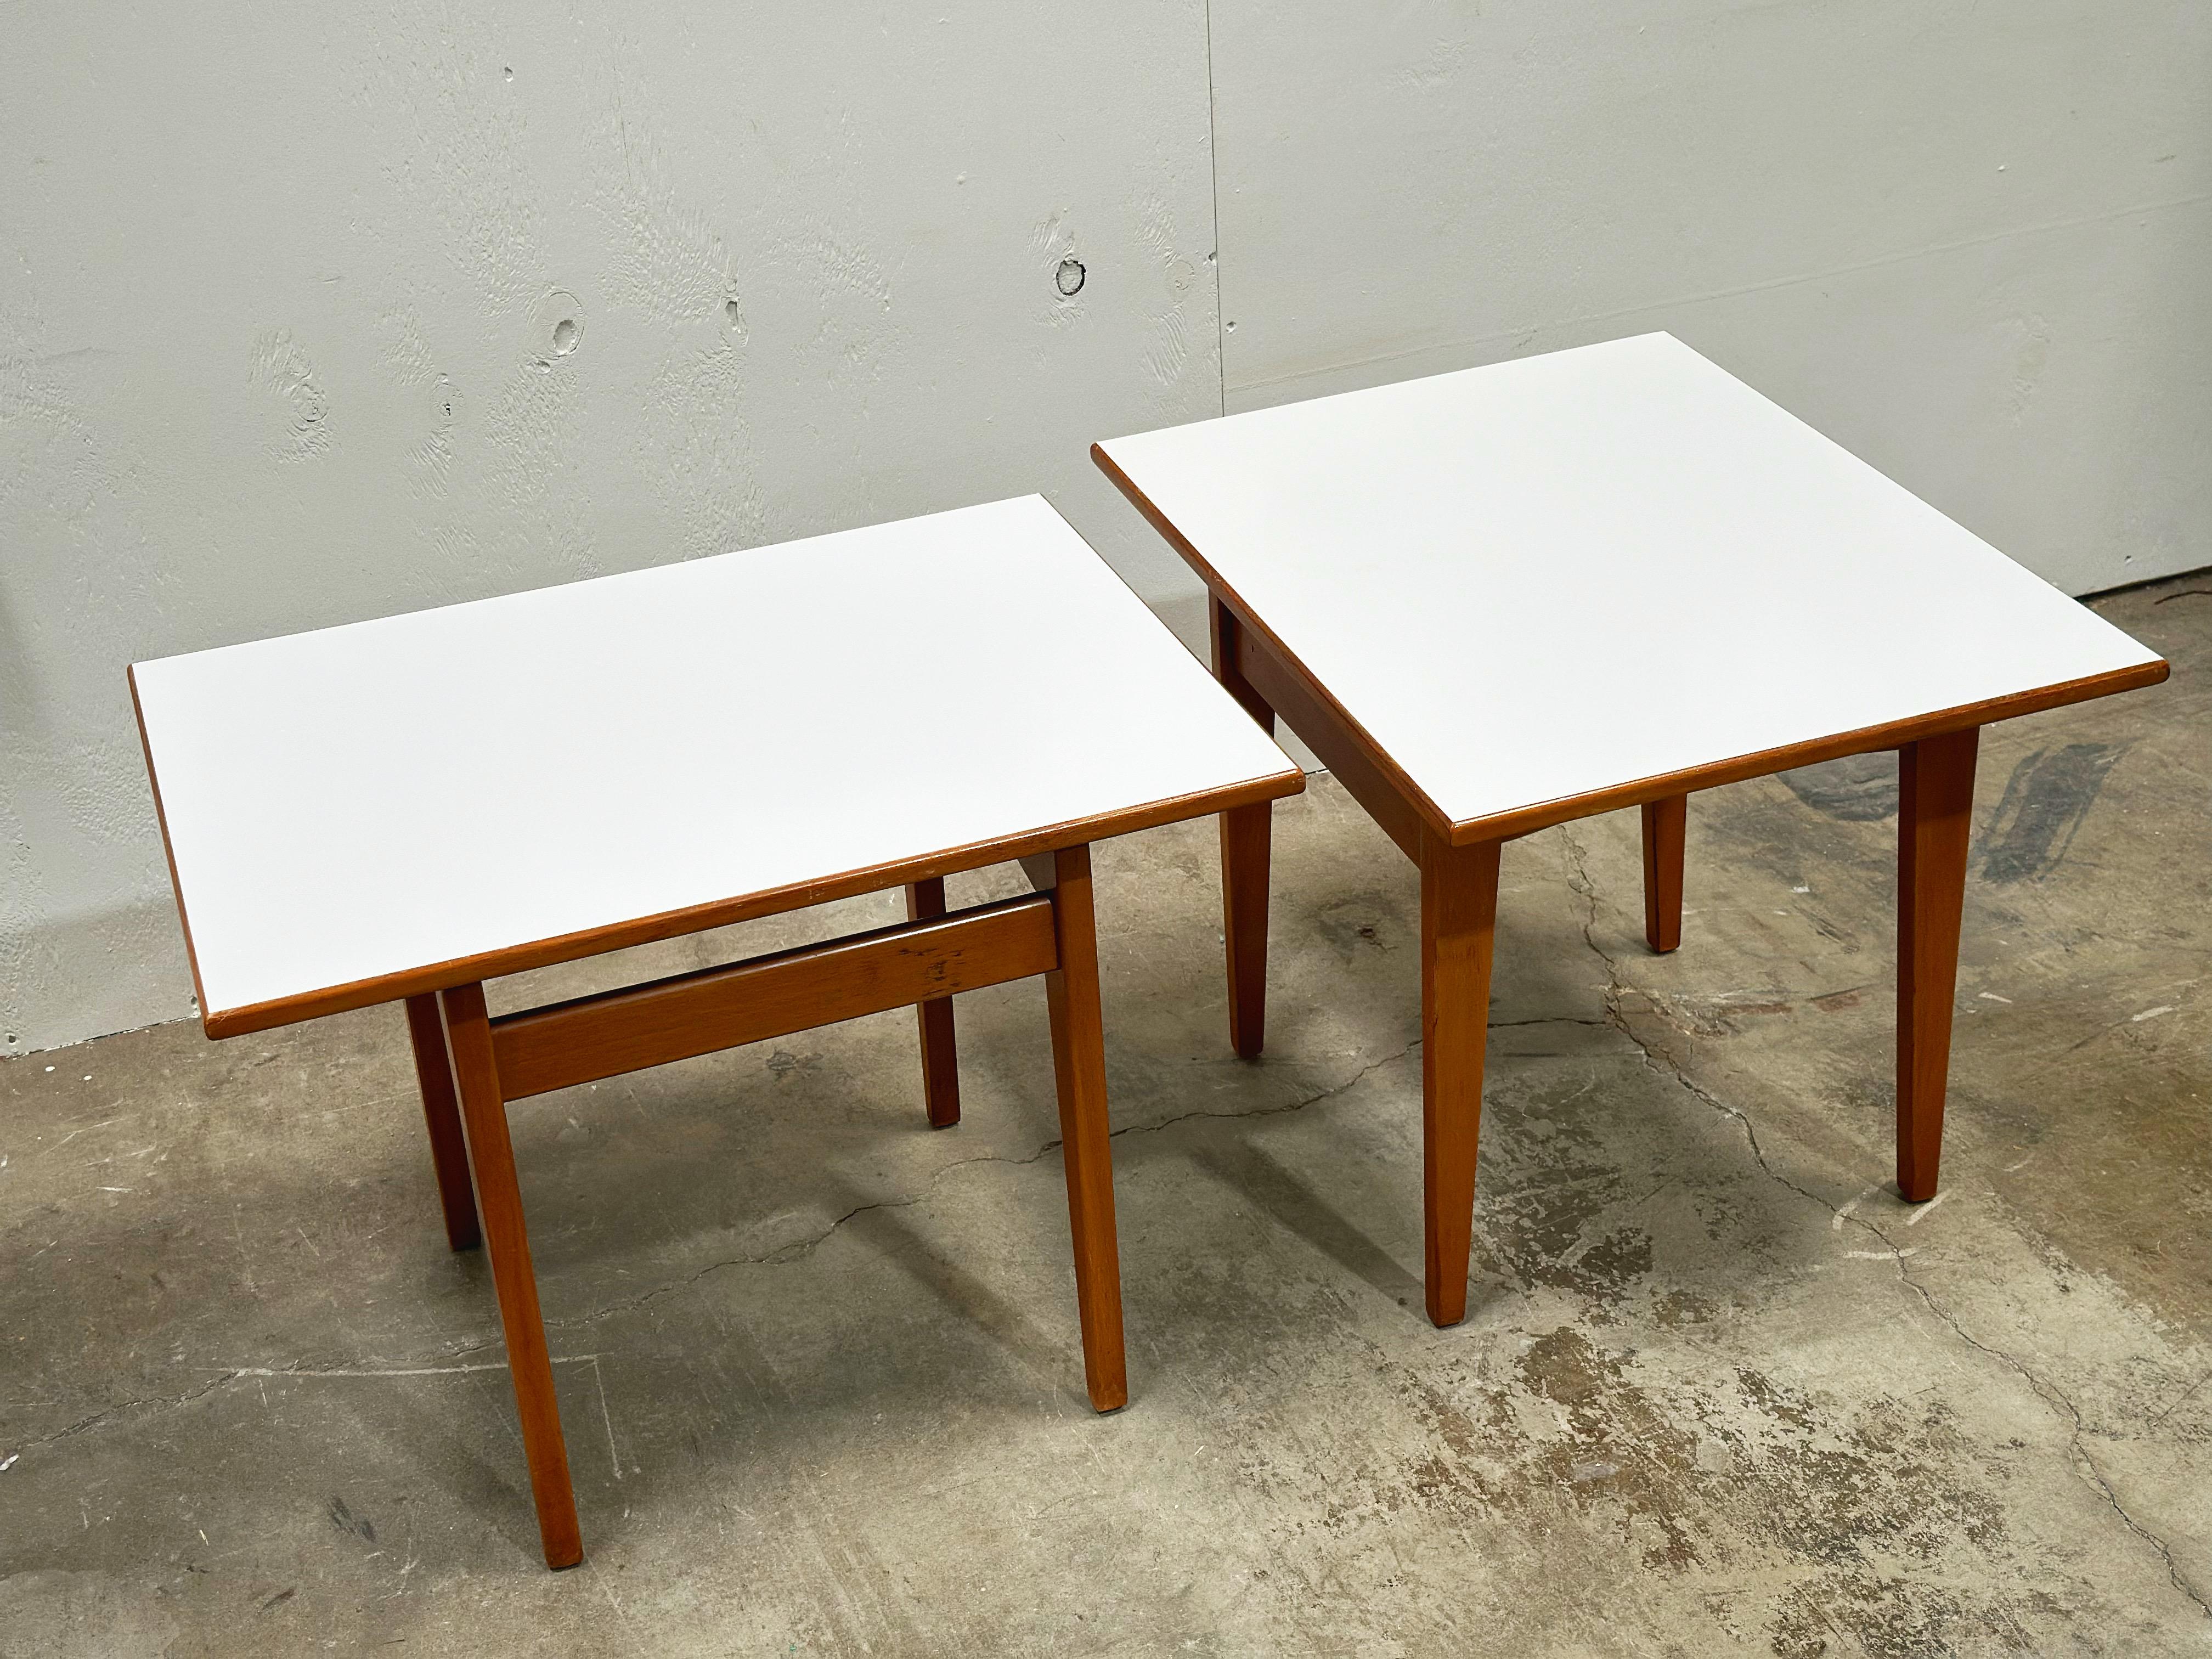 Mid-20th Century Jens Risom Side Tables - Midcentury Modern - Pair Walnut Formica Floating Top  For Sale